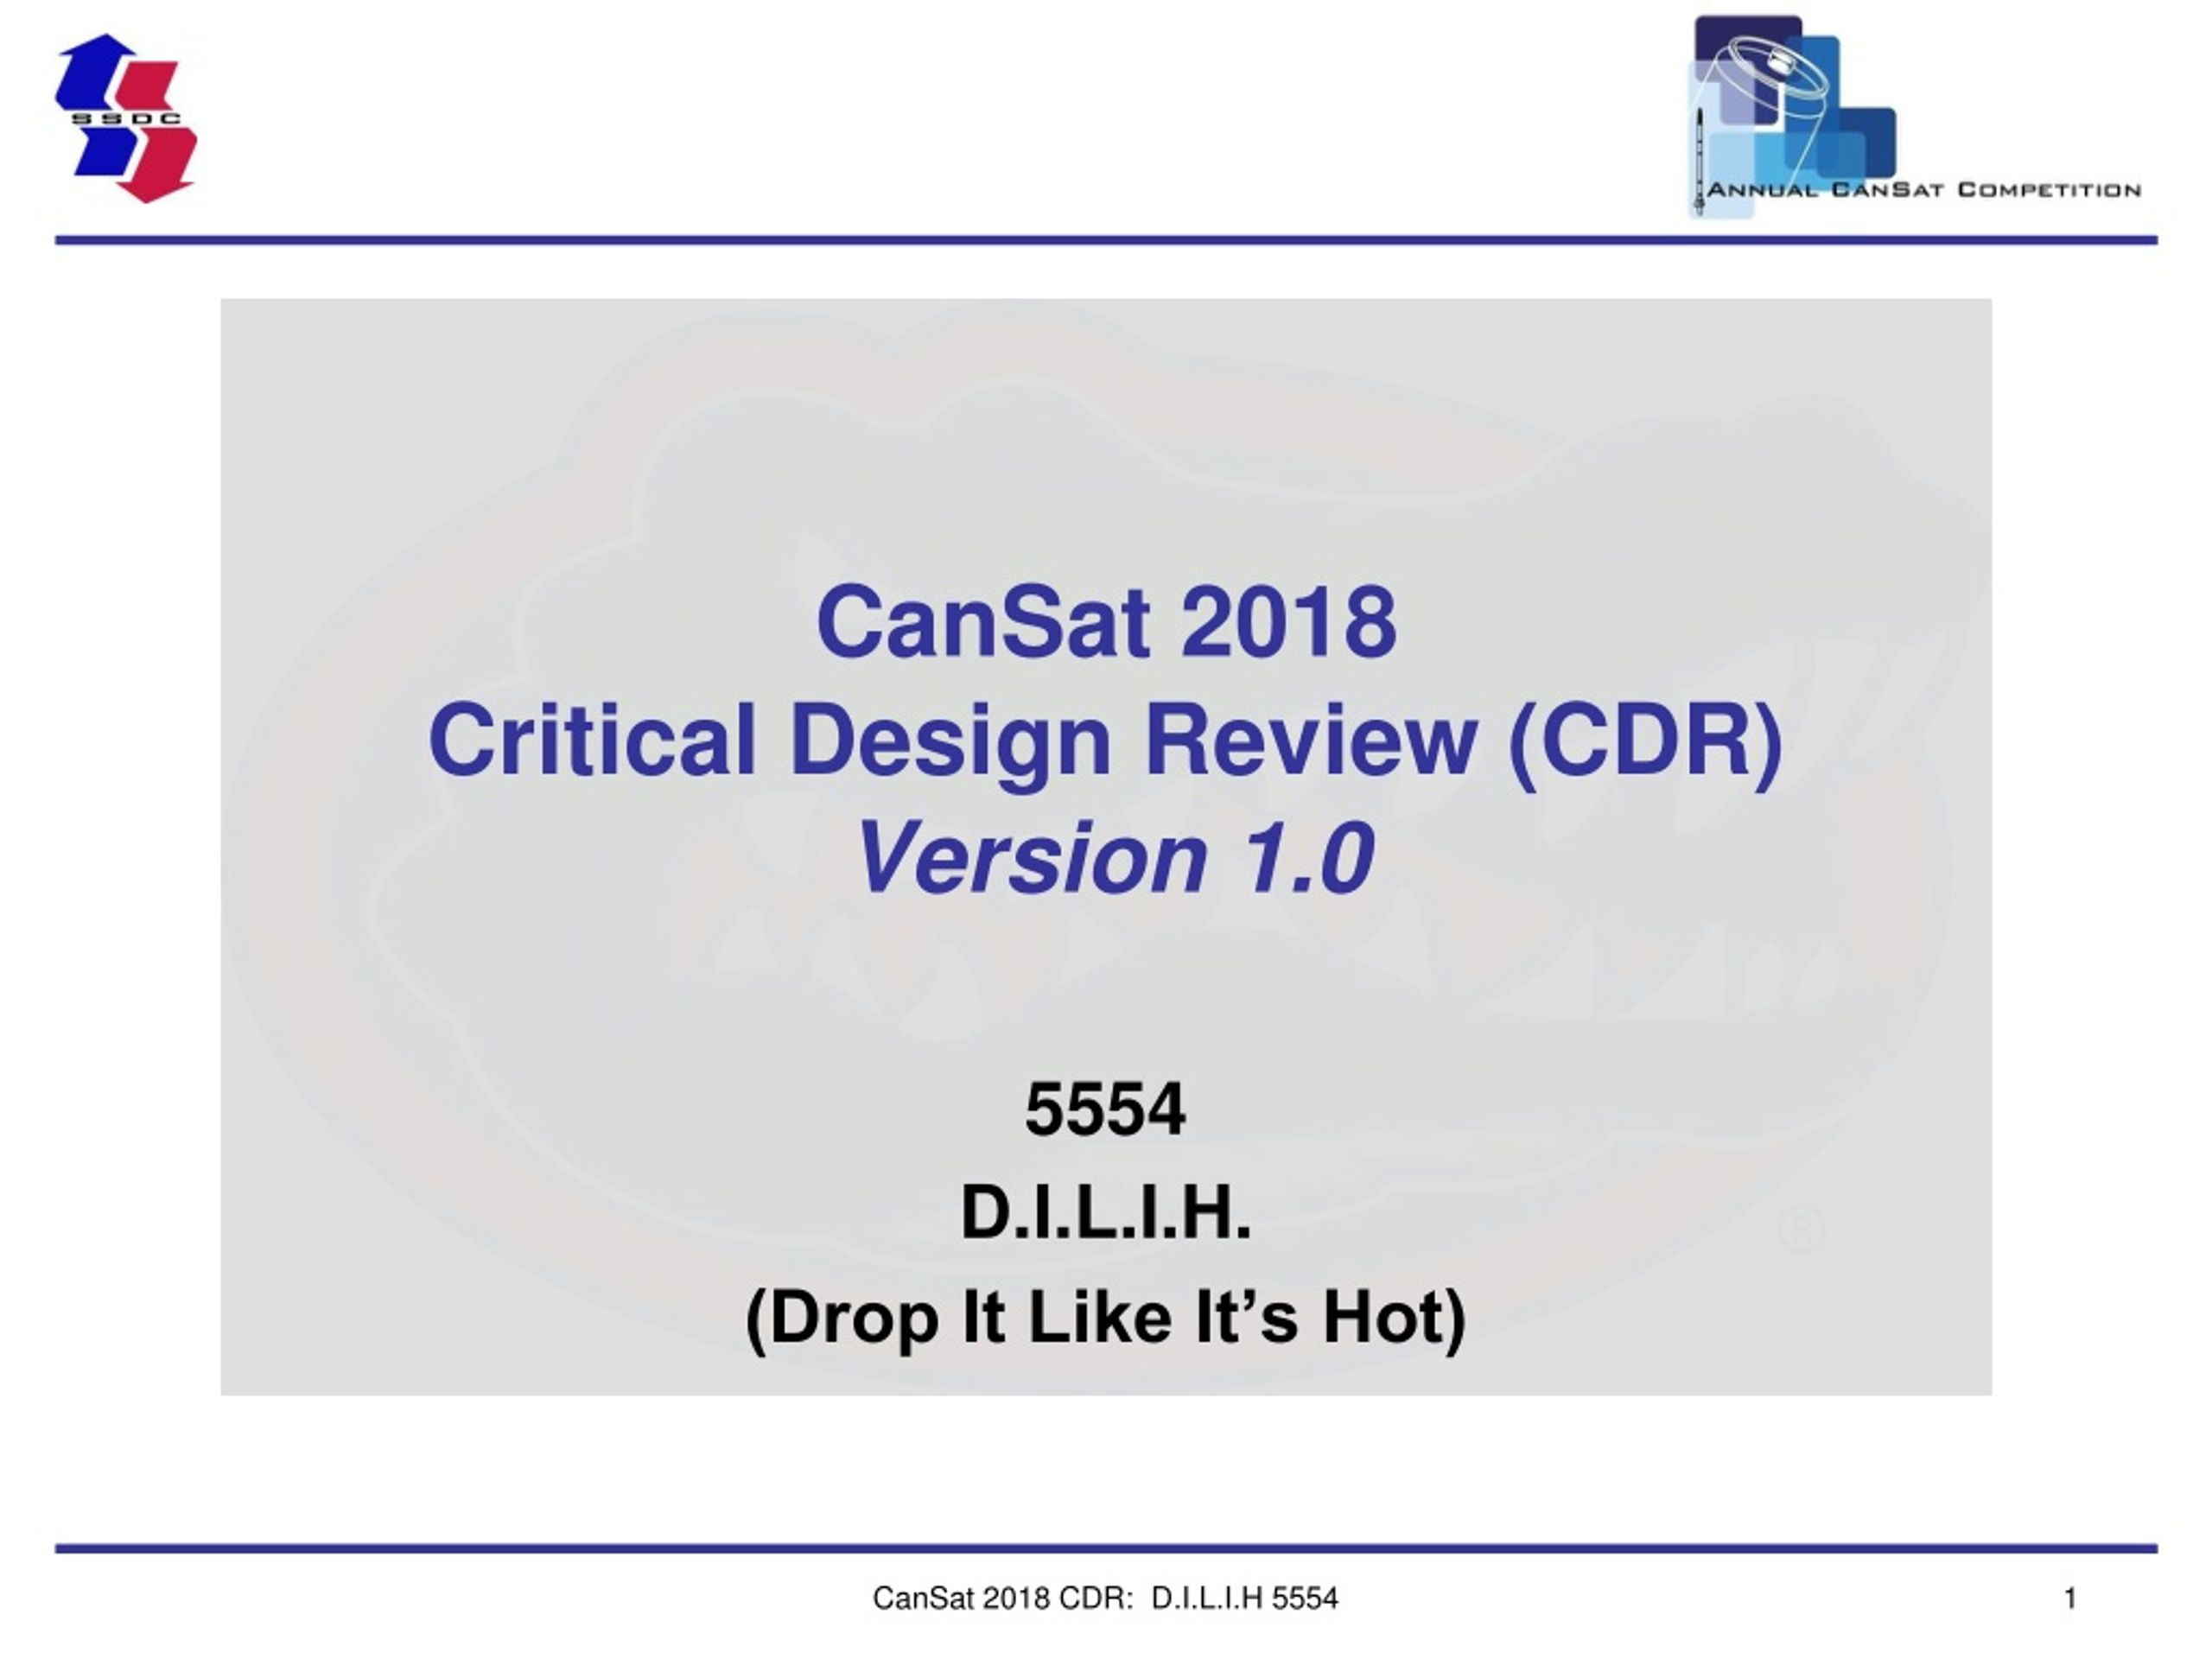 Ppt Cansat 201 8 Critical Design Review Cdr Version 1 0 Powerpoint Presentation Id 8836564